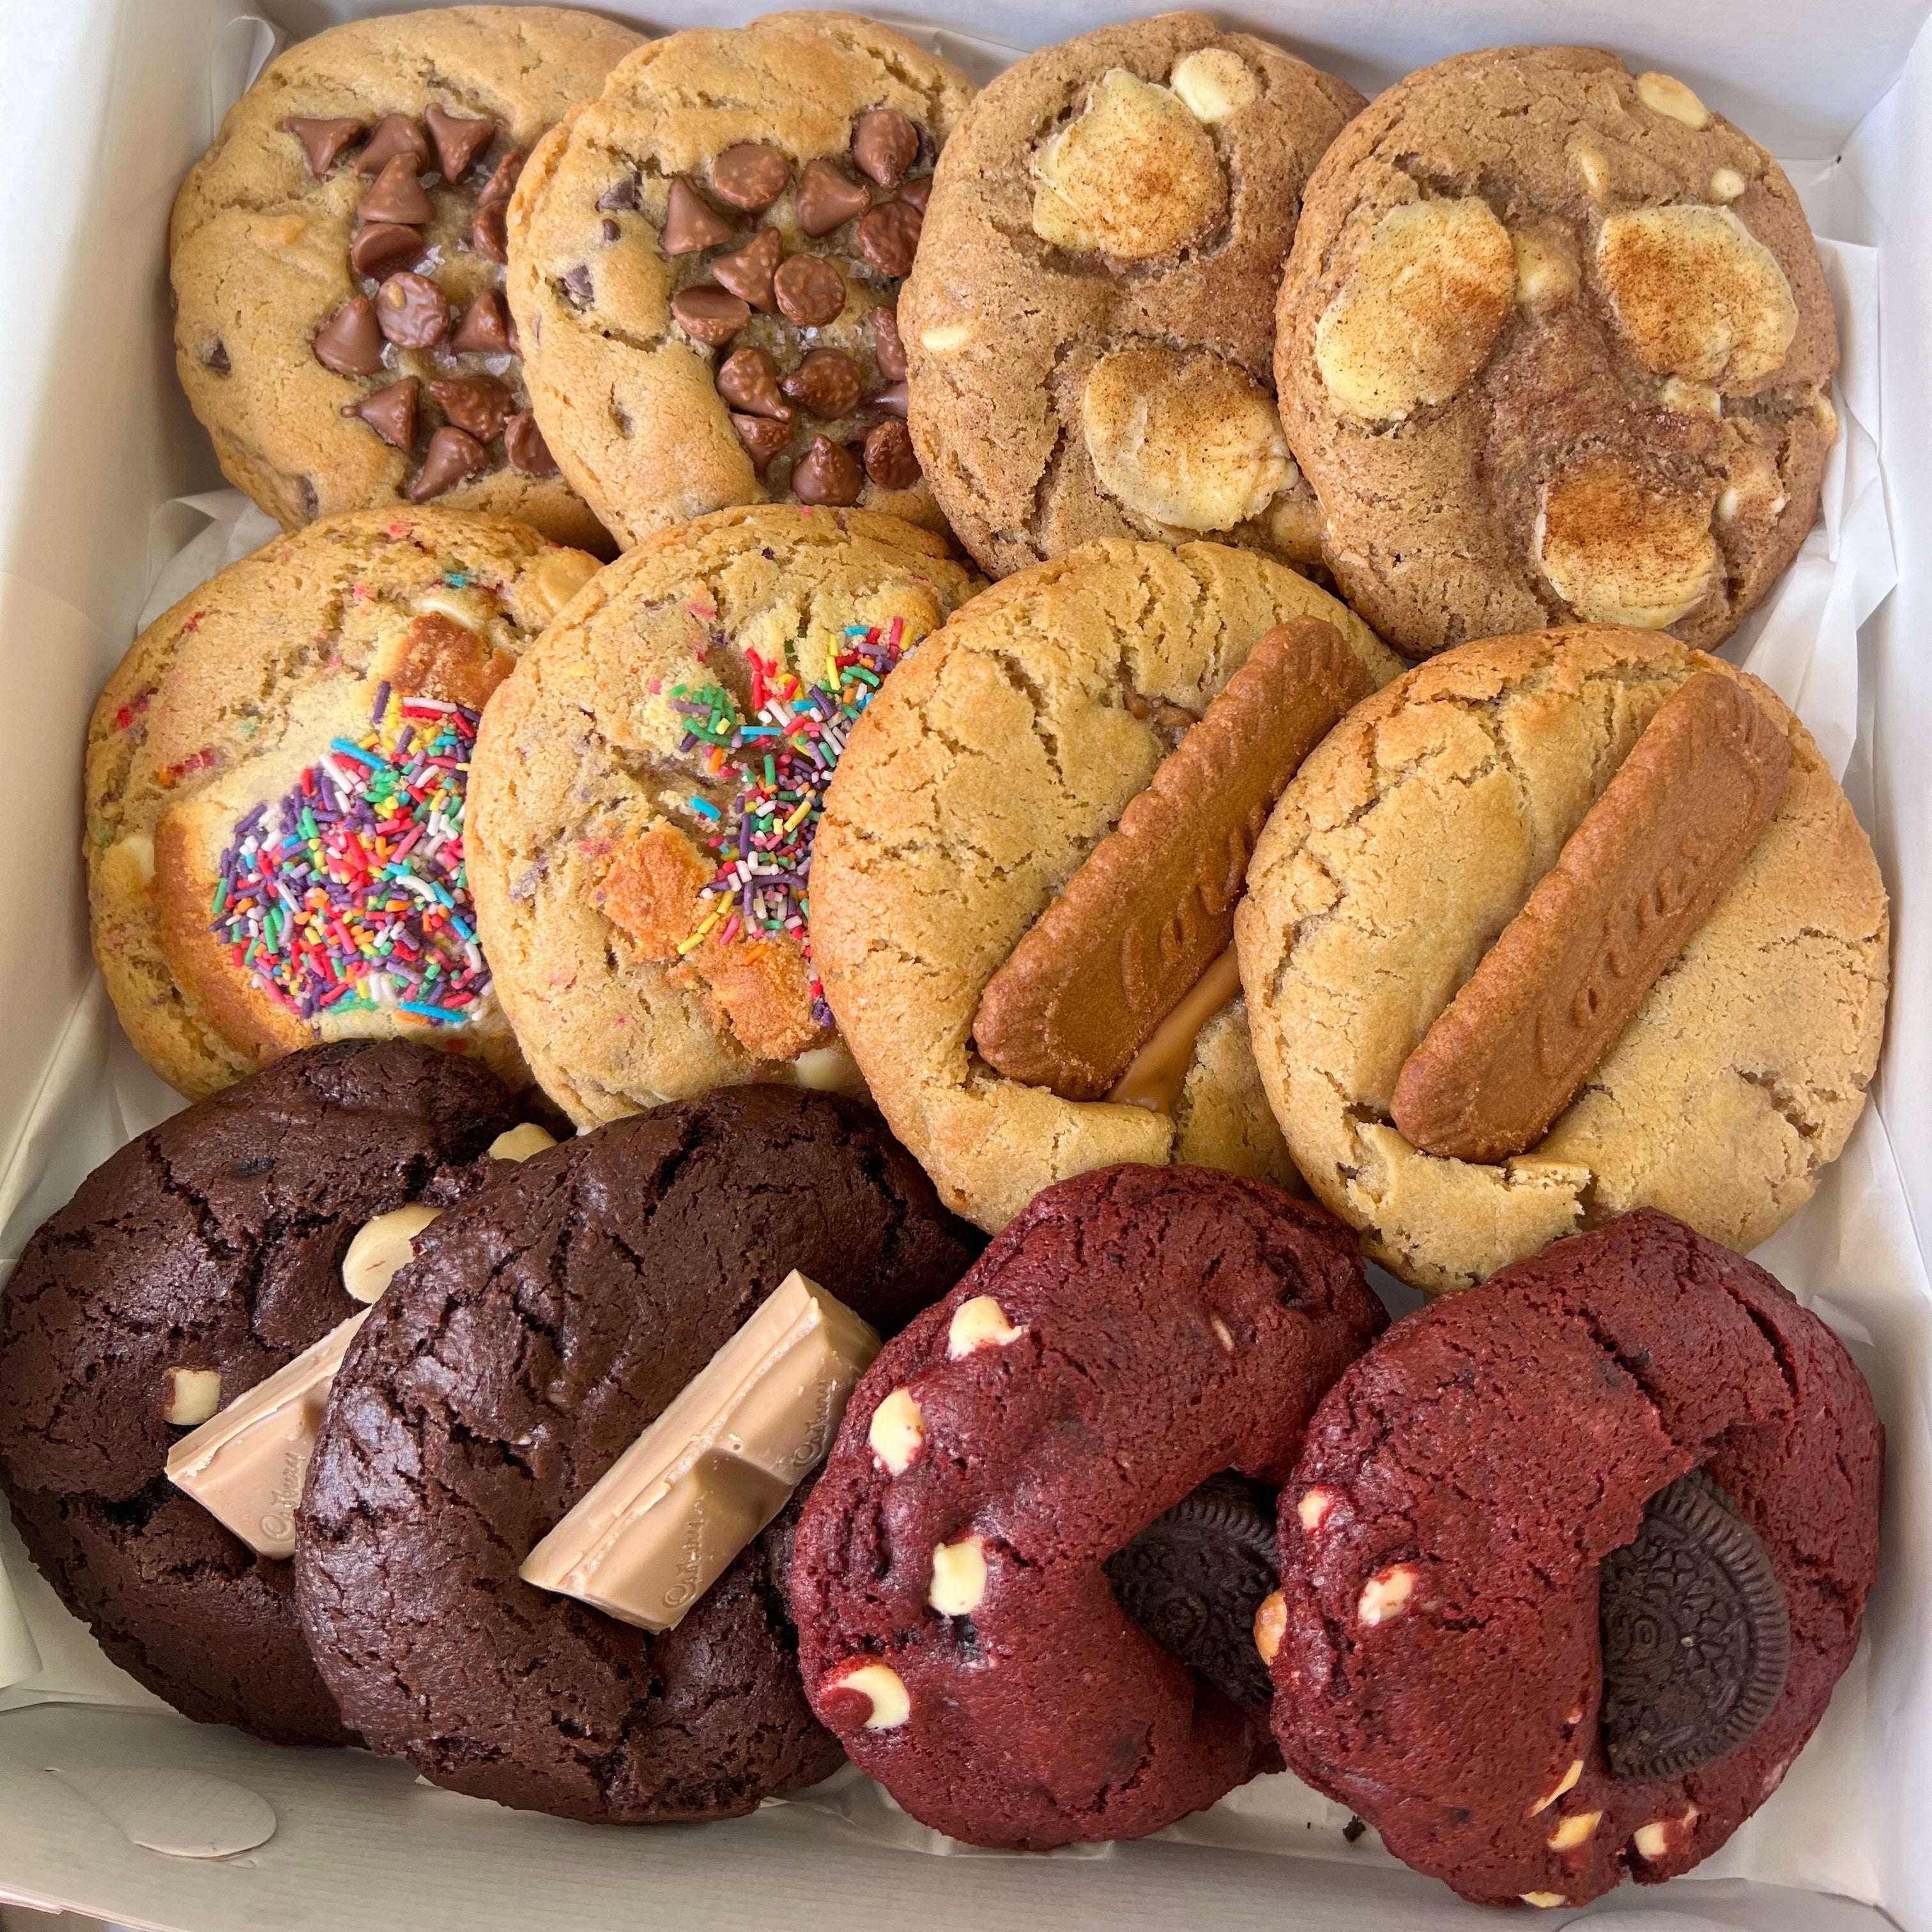 5 Scrumptious Cookies That Are Sure to Ruin Your Cheat Day